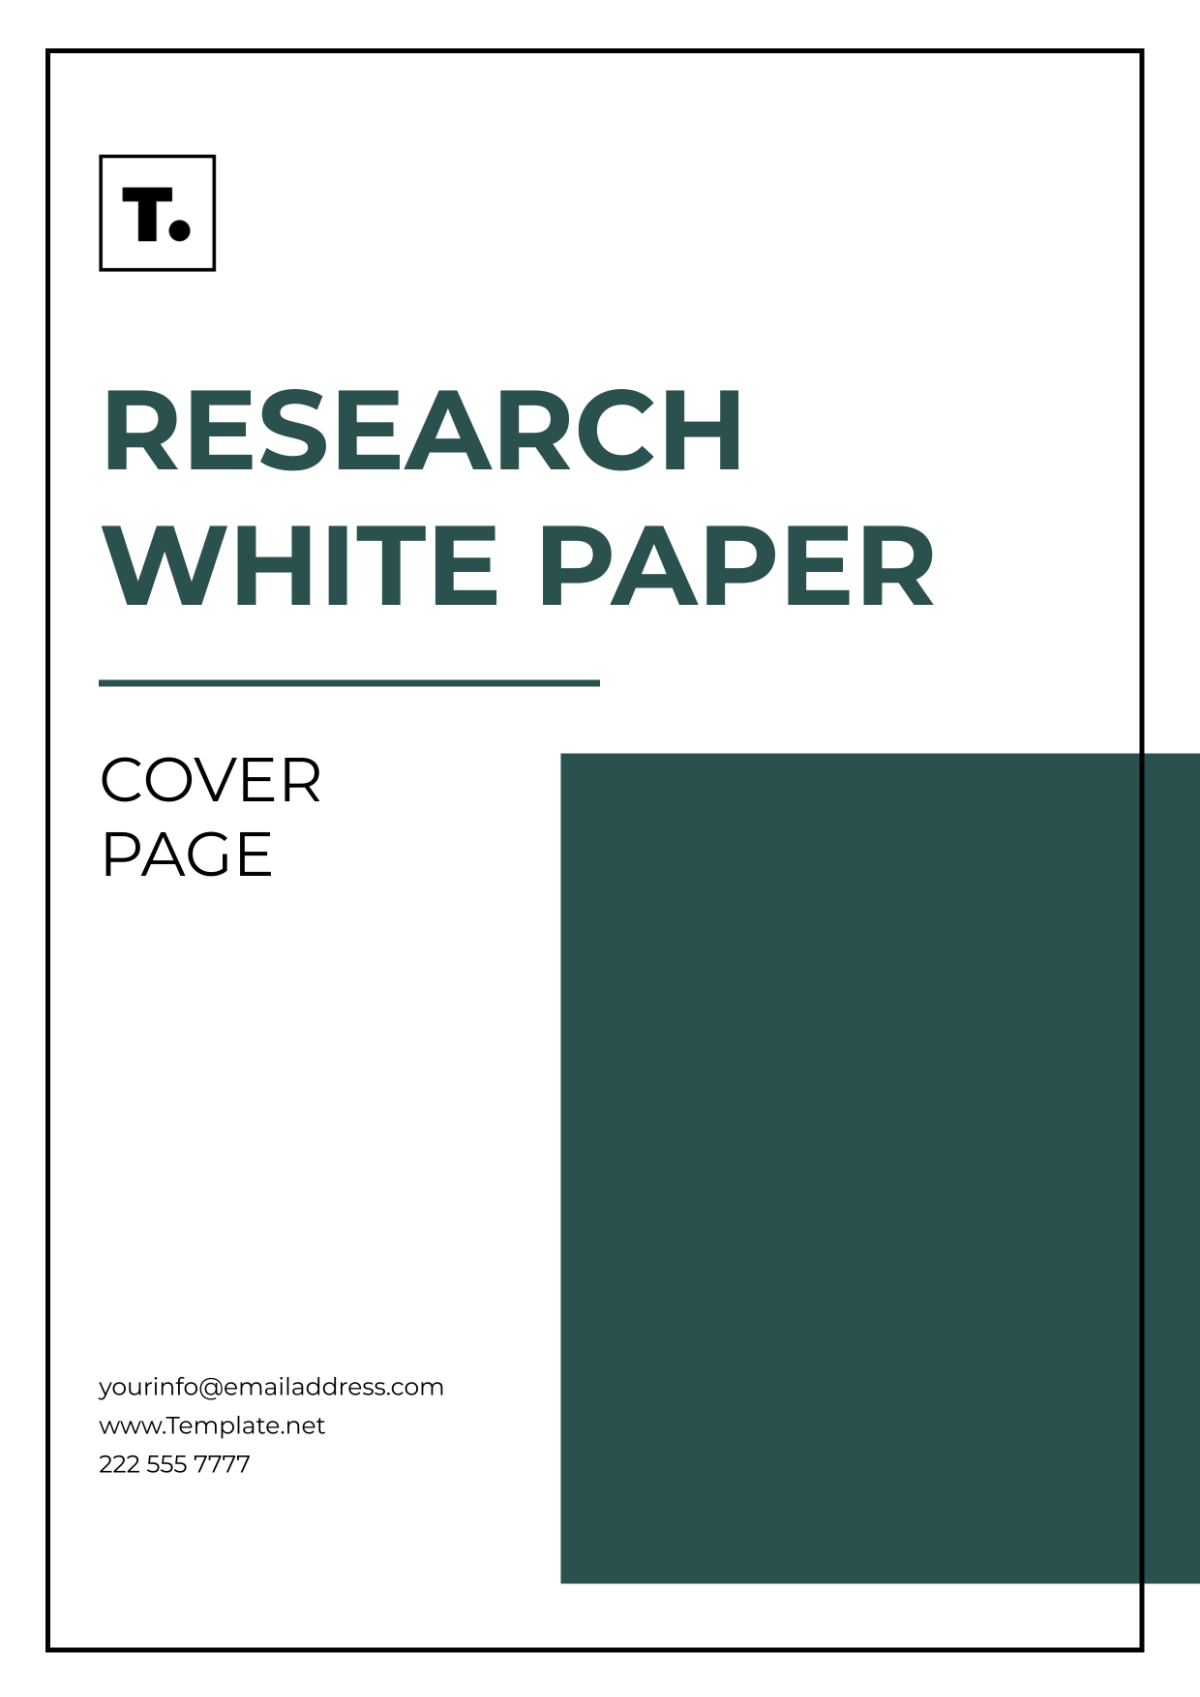 Research White Paper Cover Page